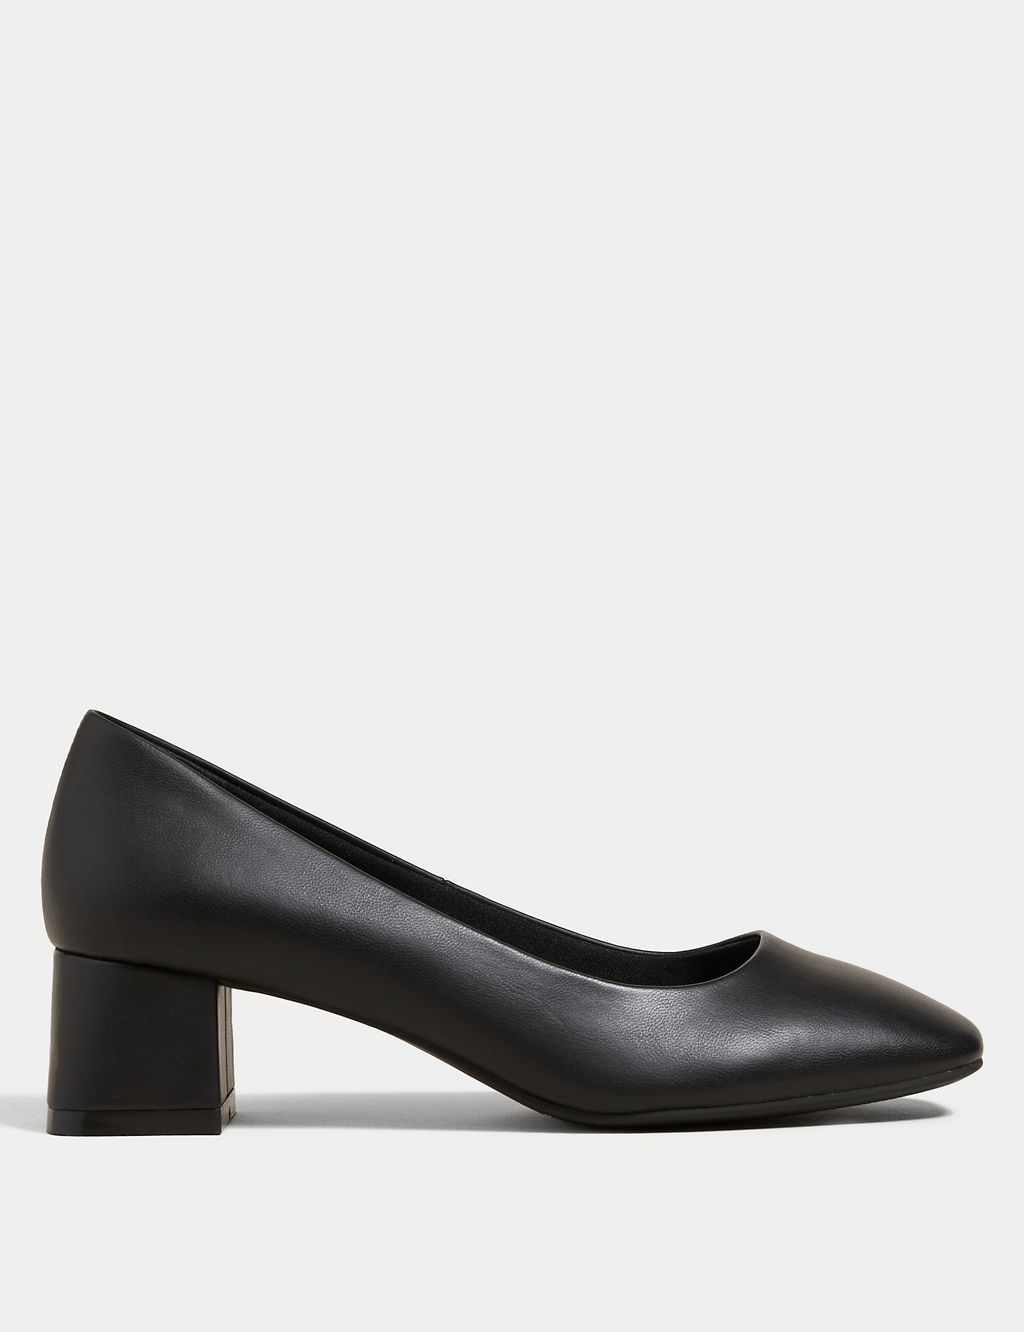 Wide Fit Block Heel Square Toe Shoes | M&S Collection | M&S